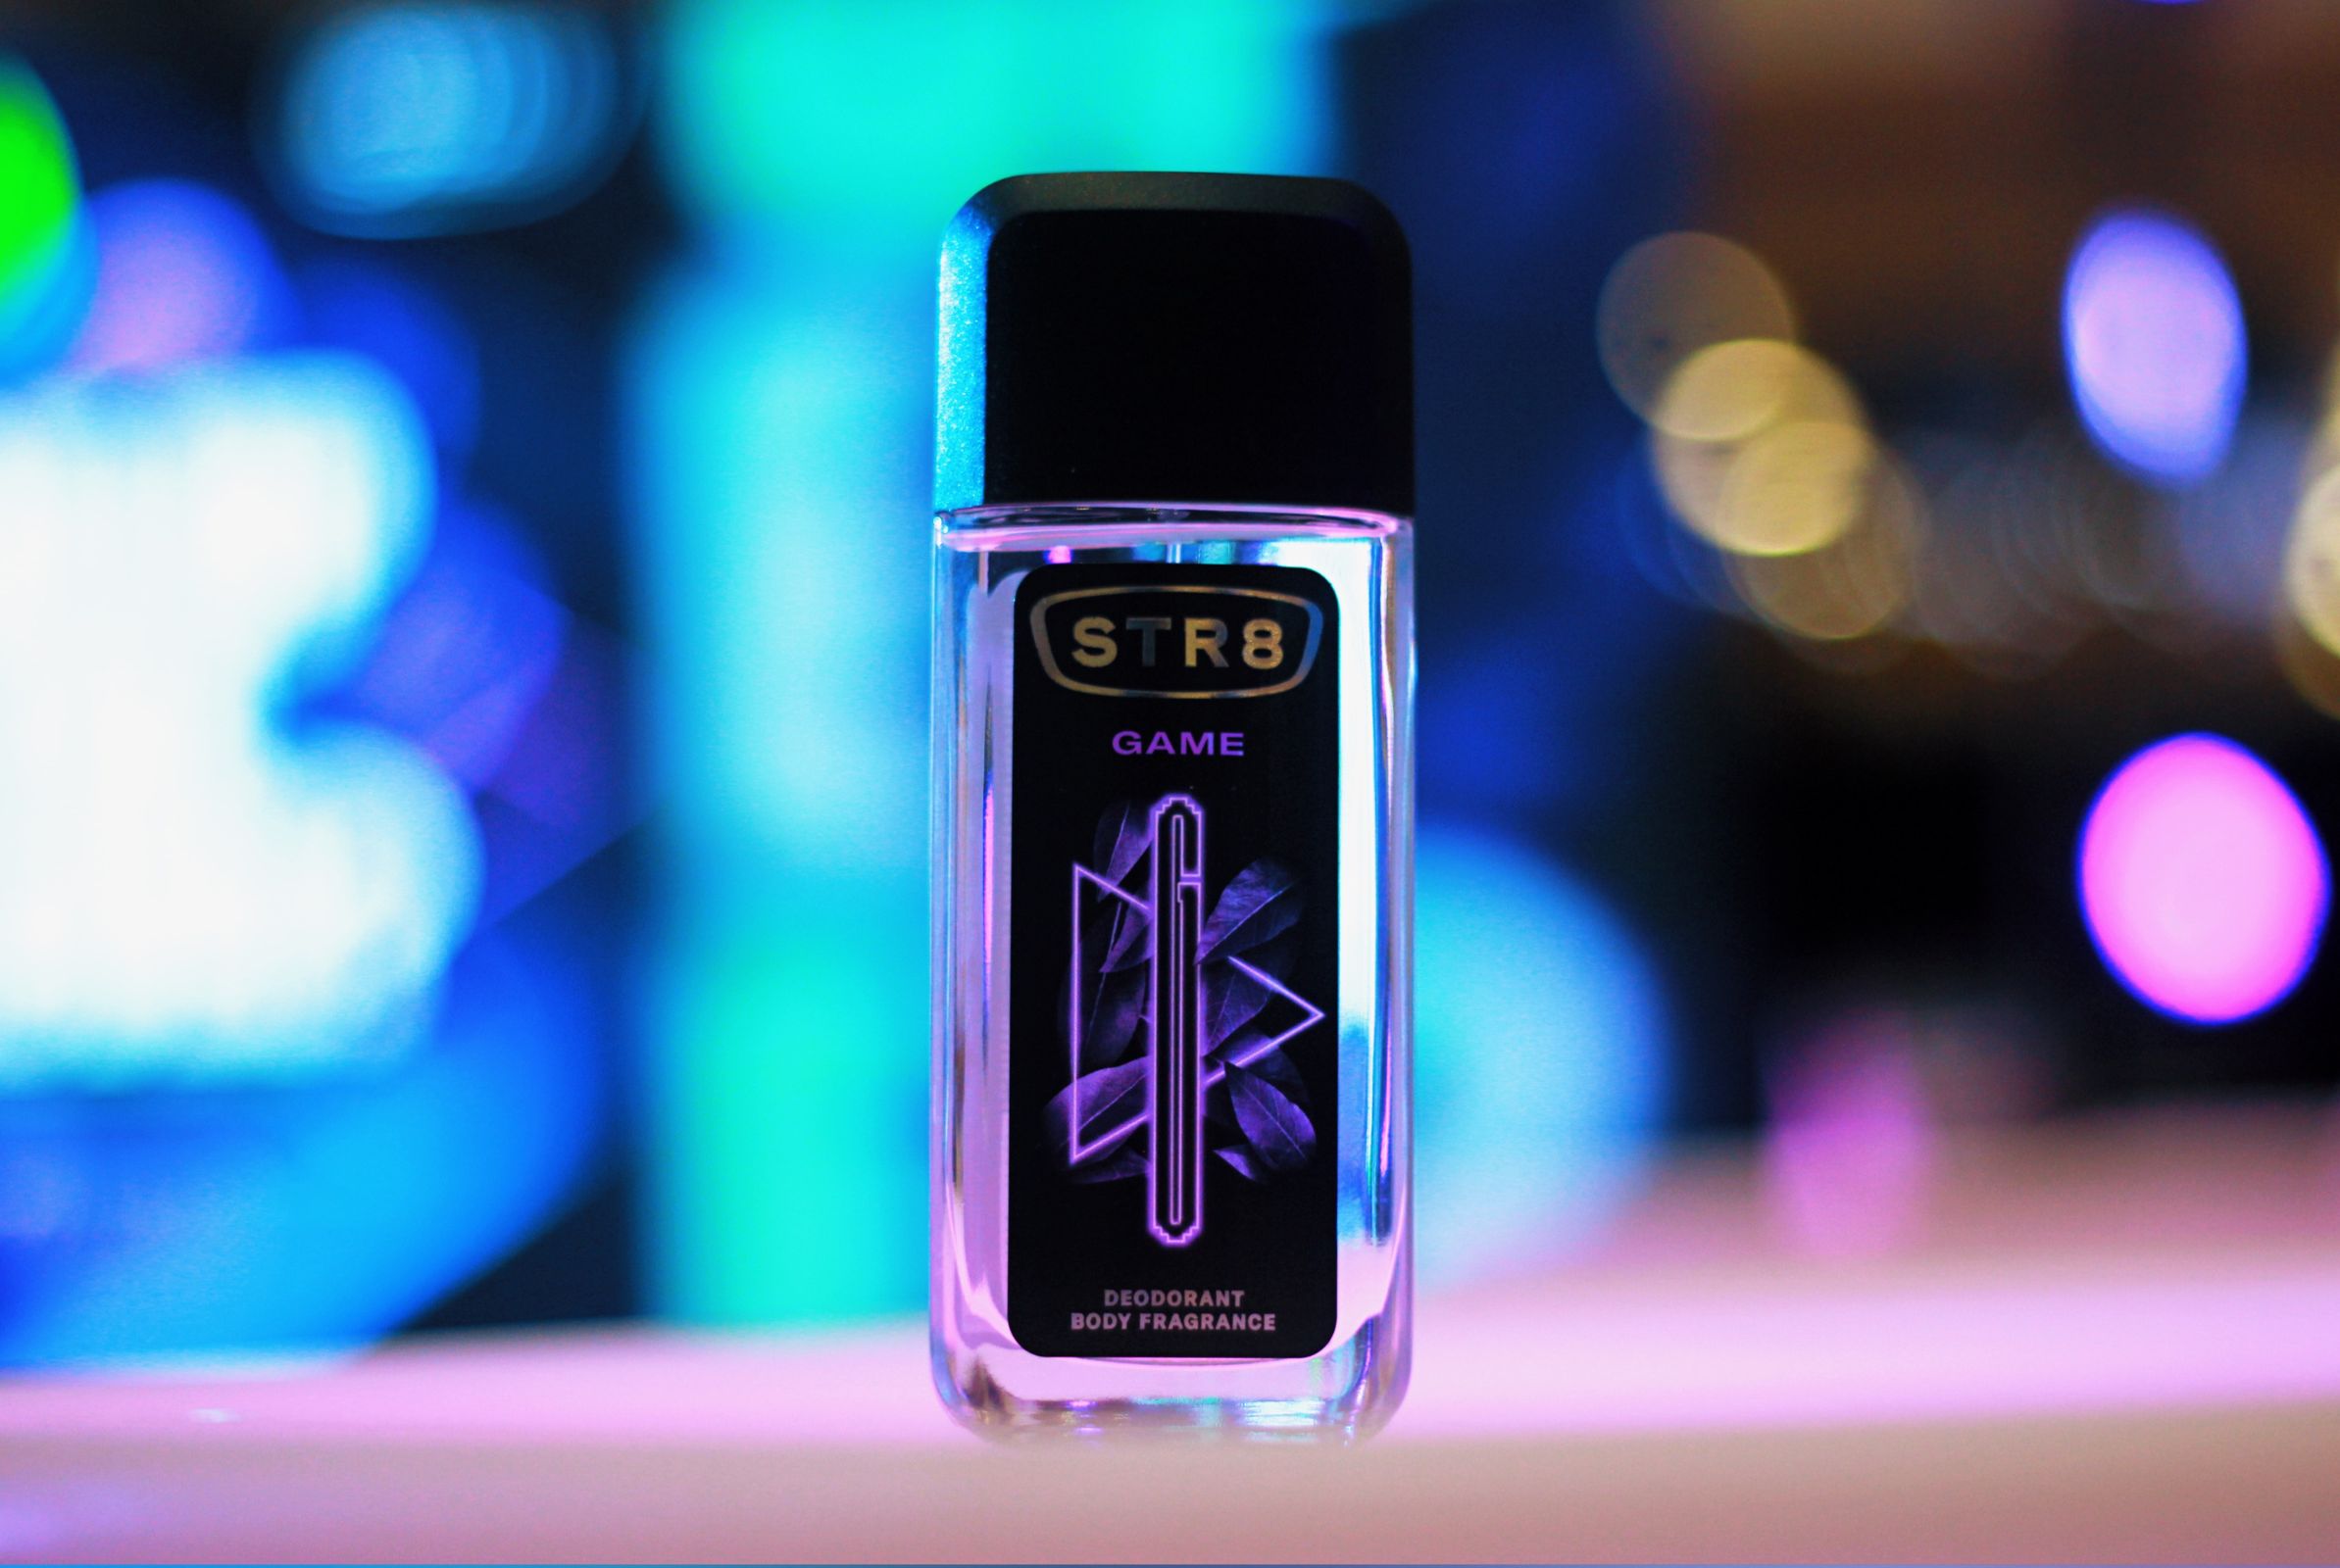 Perfumes for gamers, STR8's new collection GAME